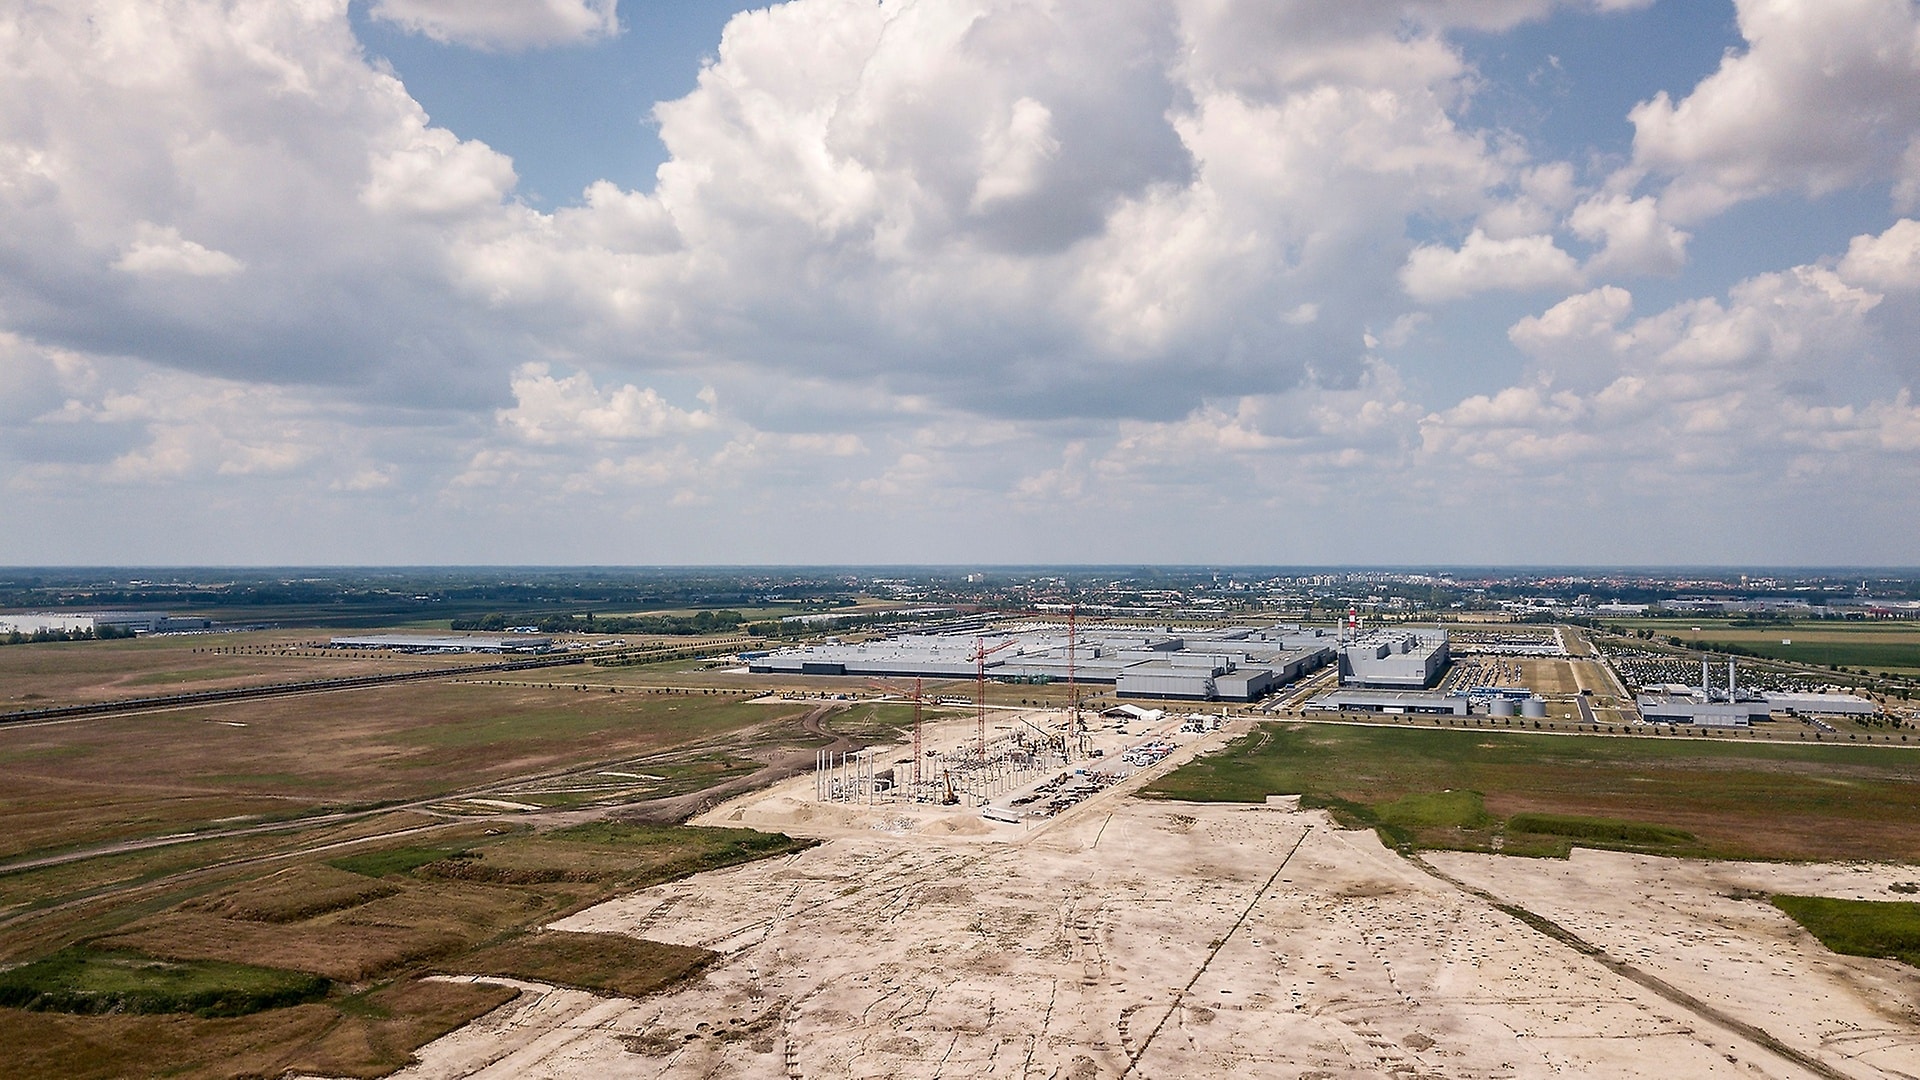 Construction Site of the “Full-Flex Plant” in Kecskemét, Hungary.